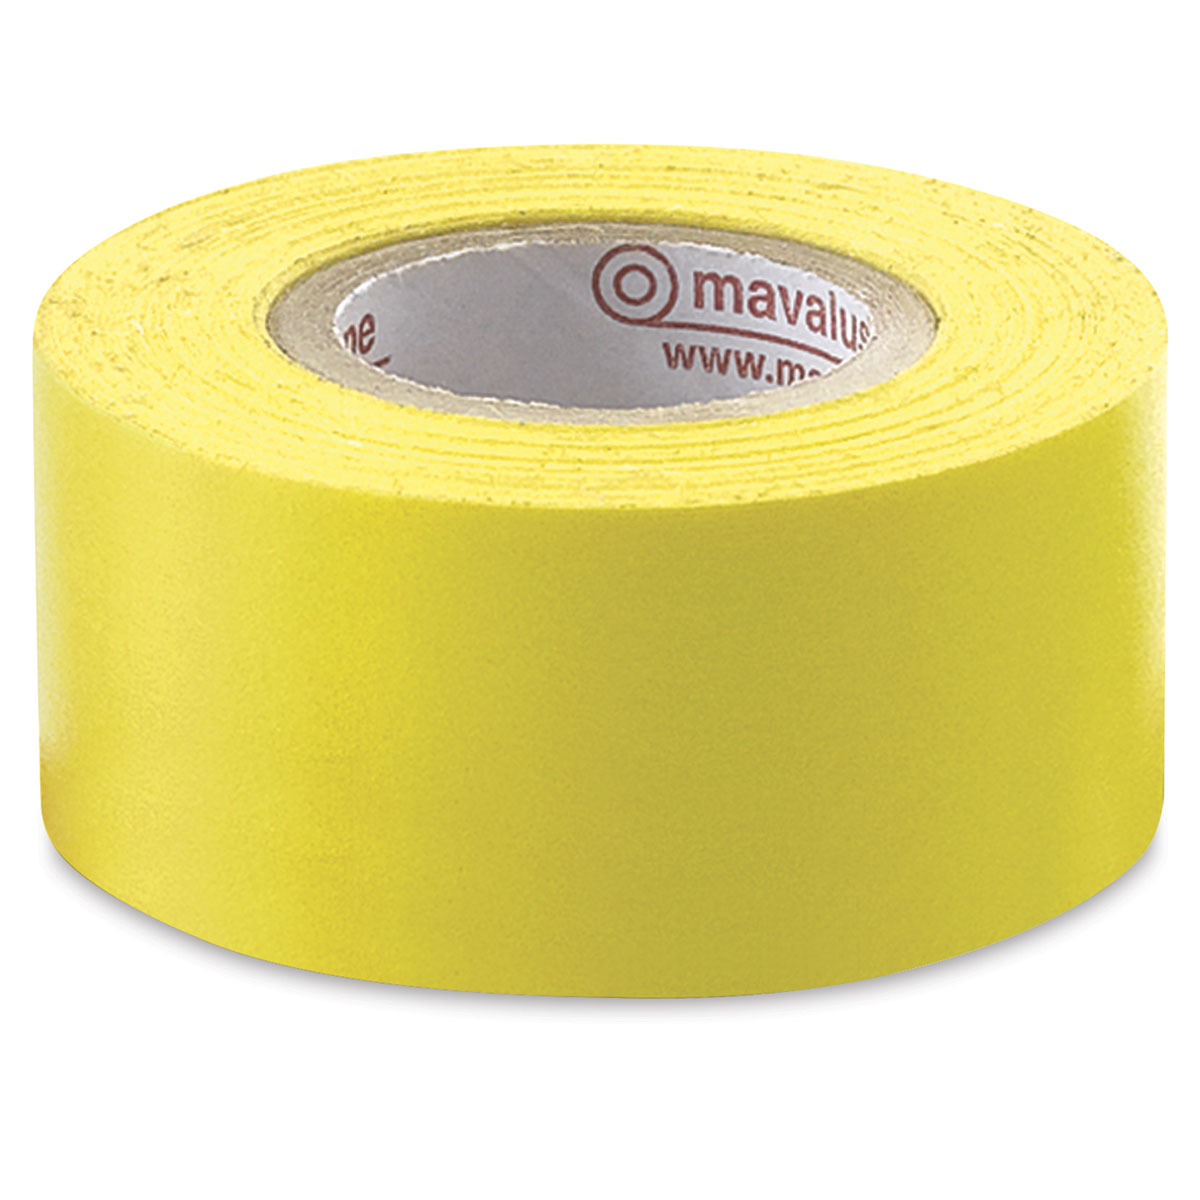  Mavalus Tape 1 Wide X 324 4-Pack - Yellow : Learning And  Development Toys : Office Products